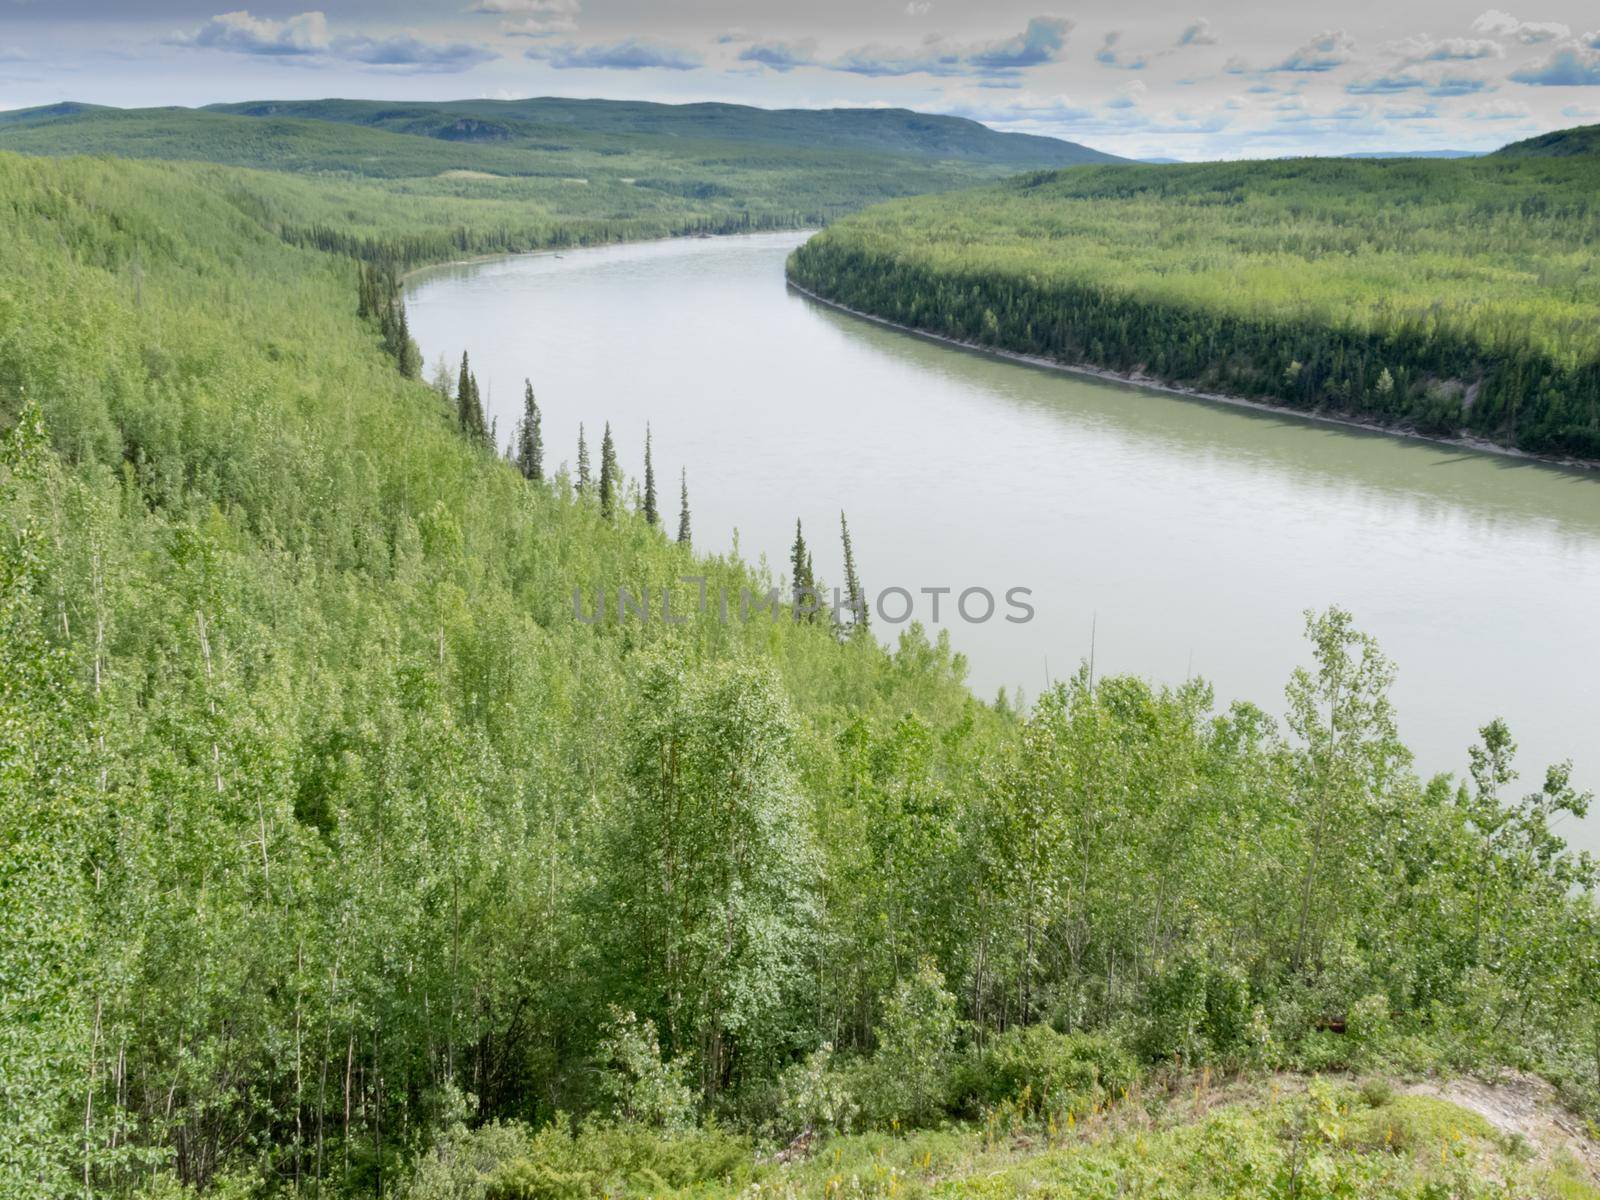 Liard River valley boreal forest taiga natural wilderness landscape of Northern British Columbia, Canada